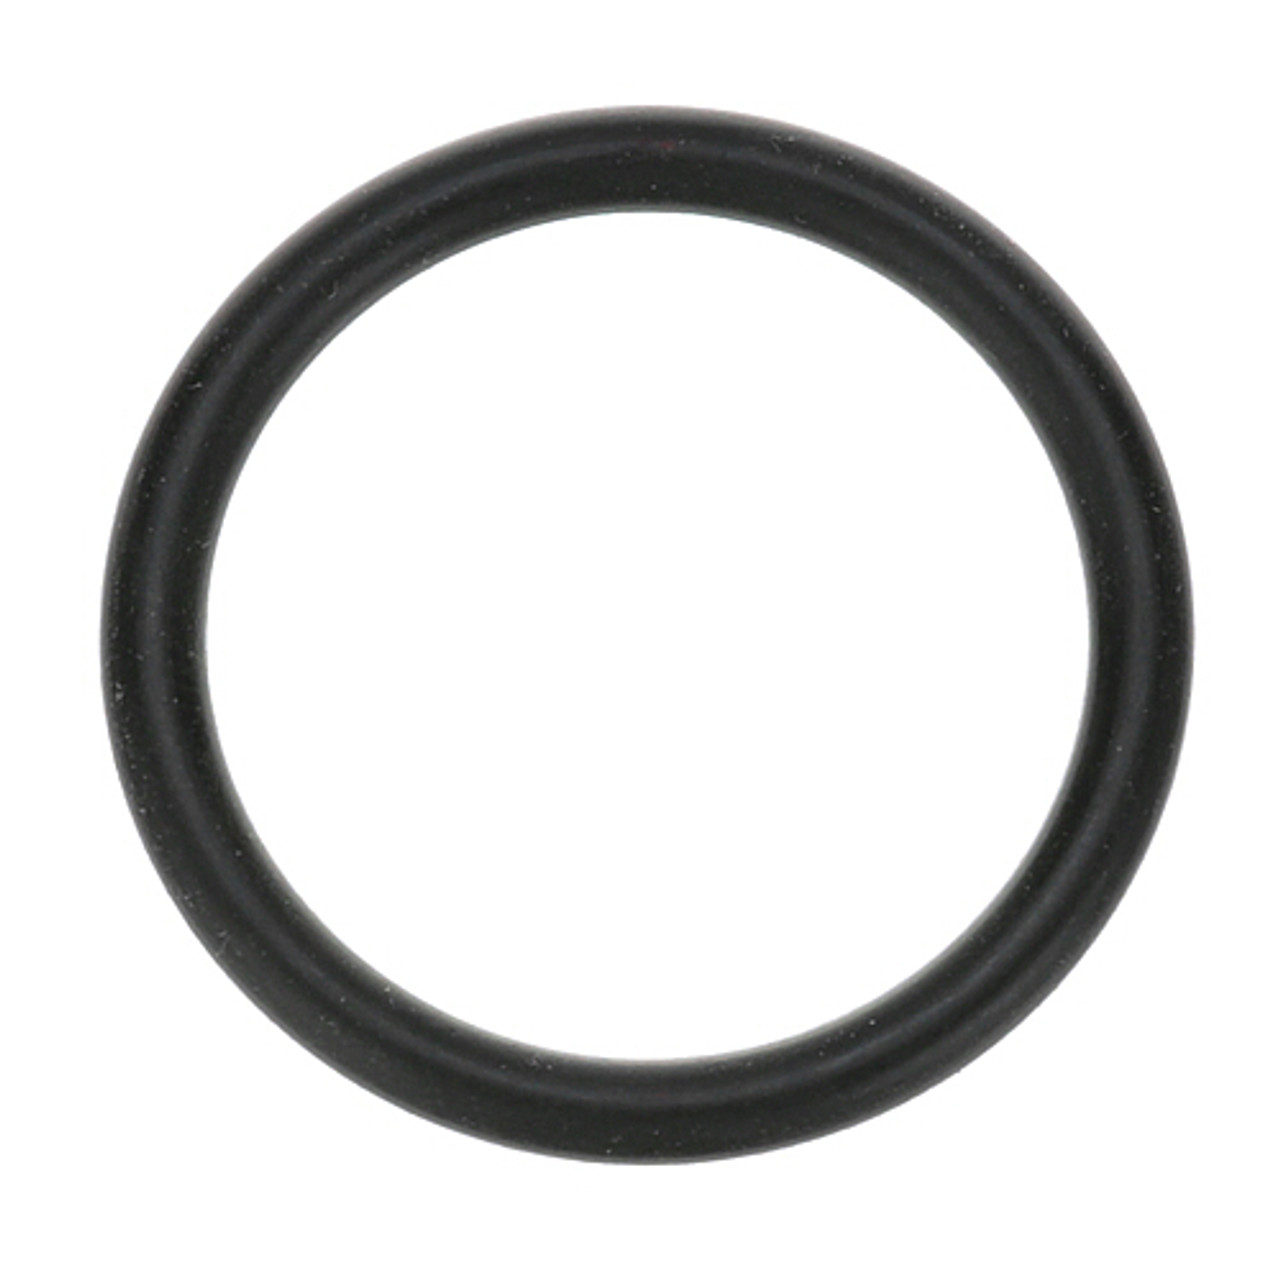 O-Ring 1-1/8" Id X 1/8" Width - Replacement Part For Hobart 00-67500-00012